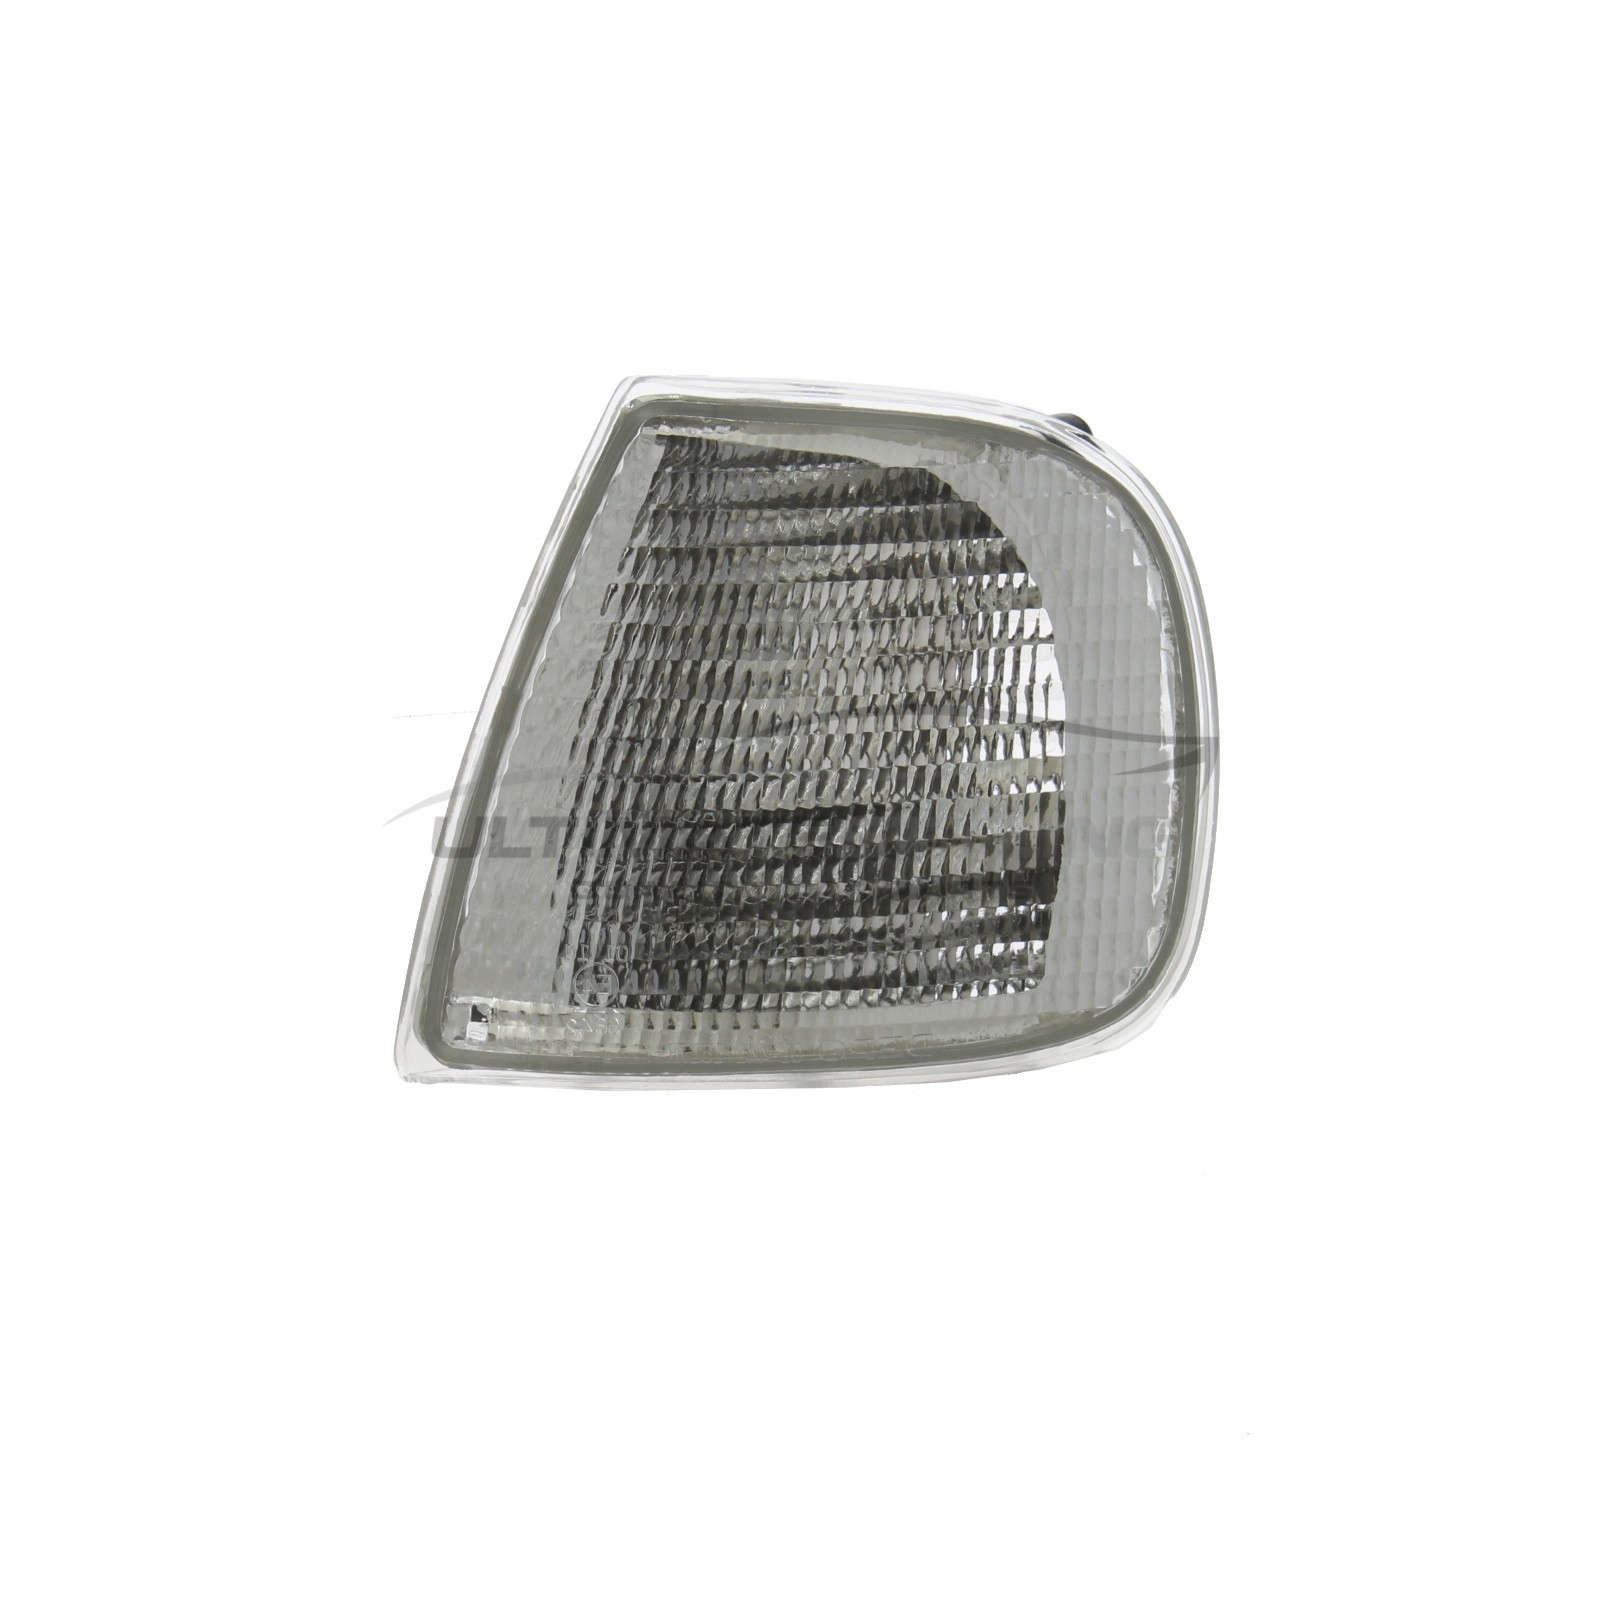 Seat Cordoba 1996-1999 / Seat Ibiza 1996-1999 / VW Caddy 1996-2004 / VW Polo 2000-2002 Clear Front Indicator Excludes Bulb Holder - Passenger Side (LH)